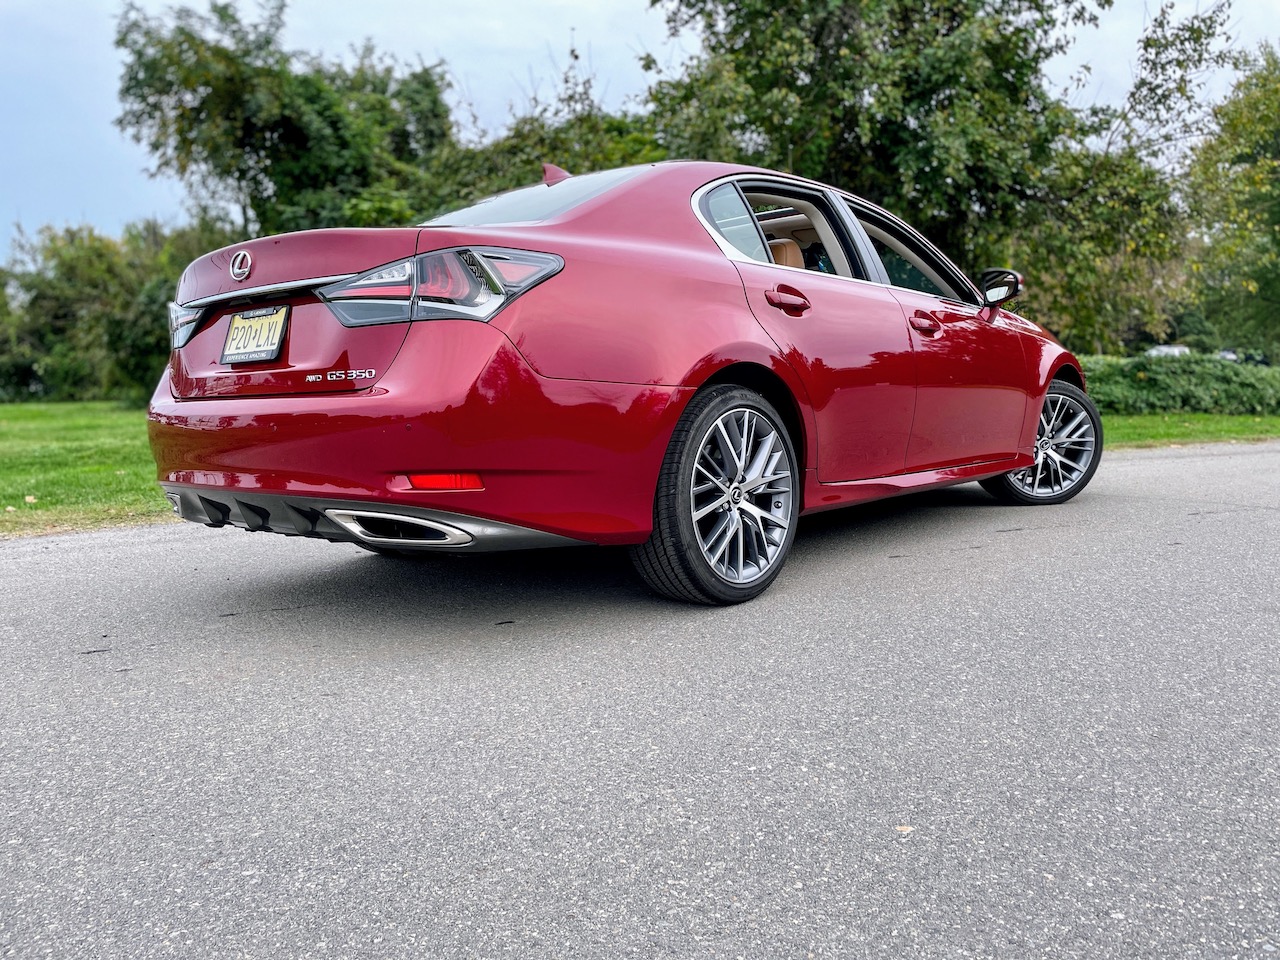 2020 Lexus GS350 AWD Review: An Ode to Aristos Gone By | Out Motorsports